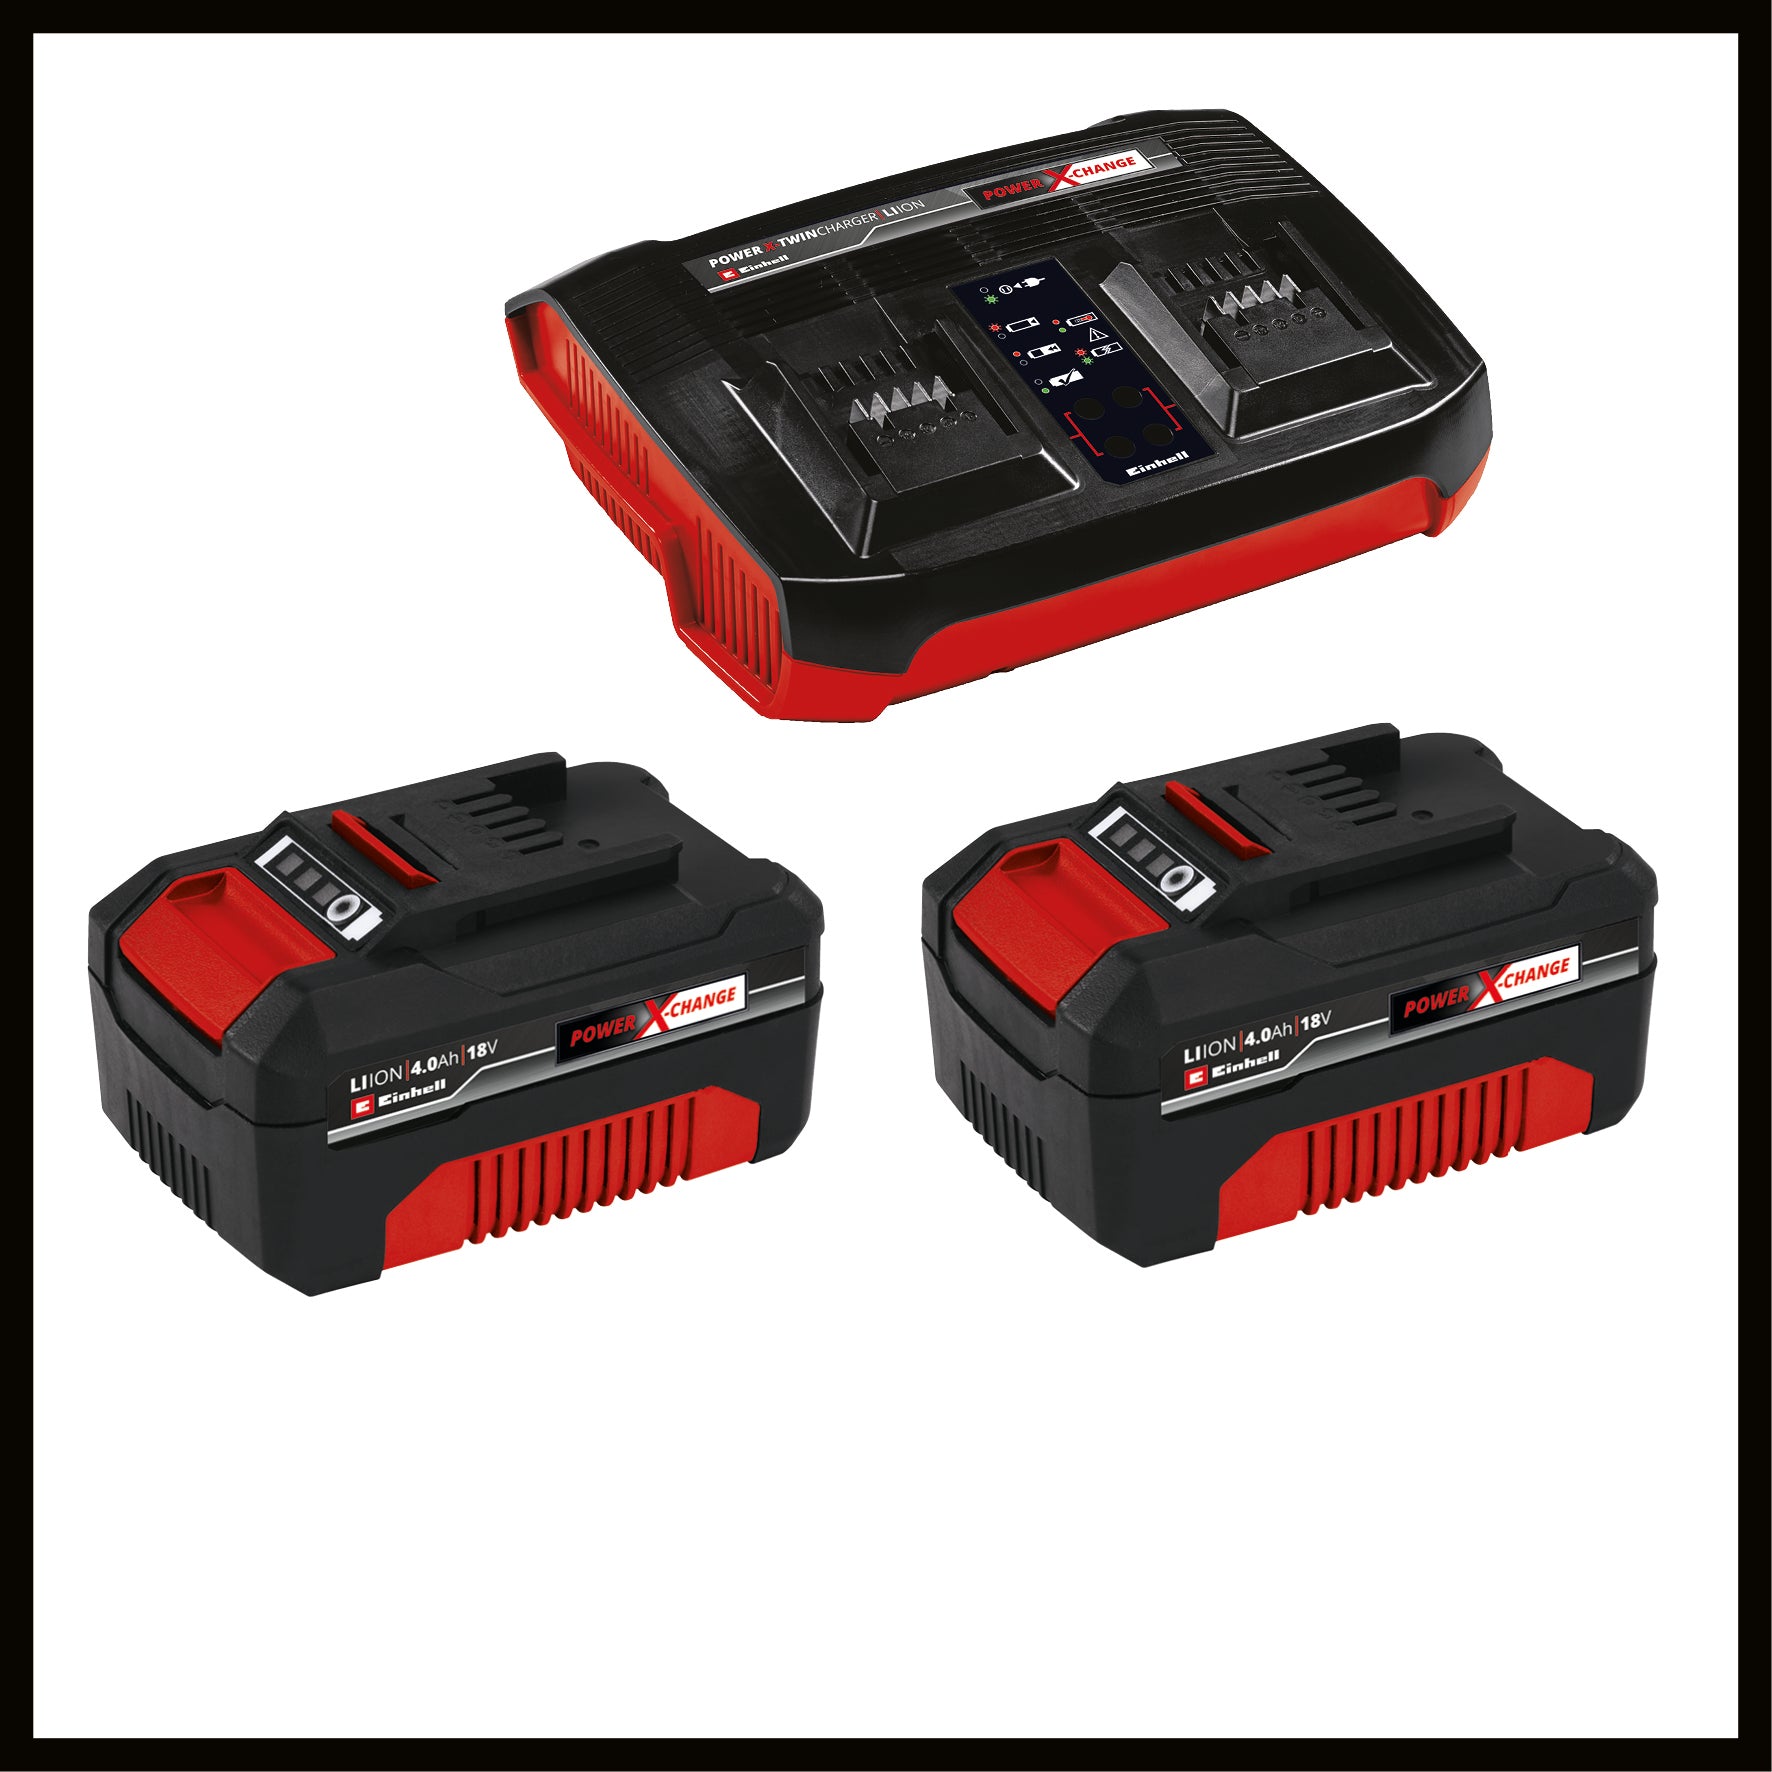 Einhell Power X-Change 18V, 4.0Ah Lithium-Ion Battery - Universally  Compatible With All Einhell PXC Power Tools And Garden Machines